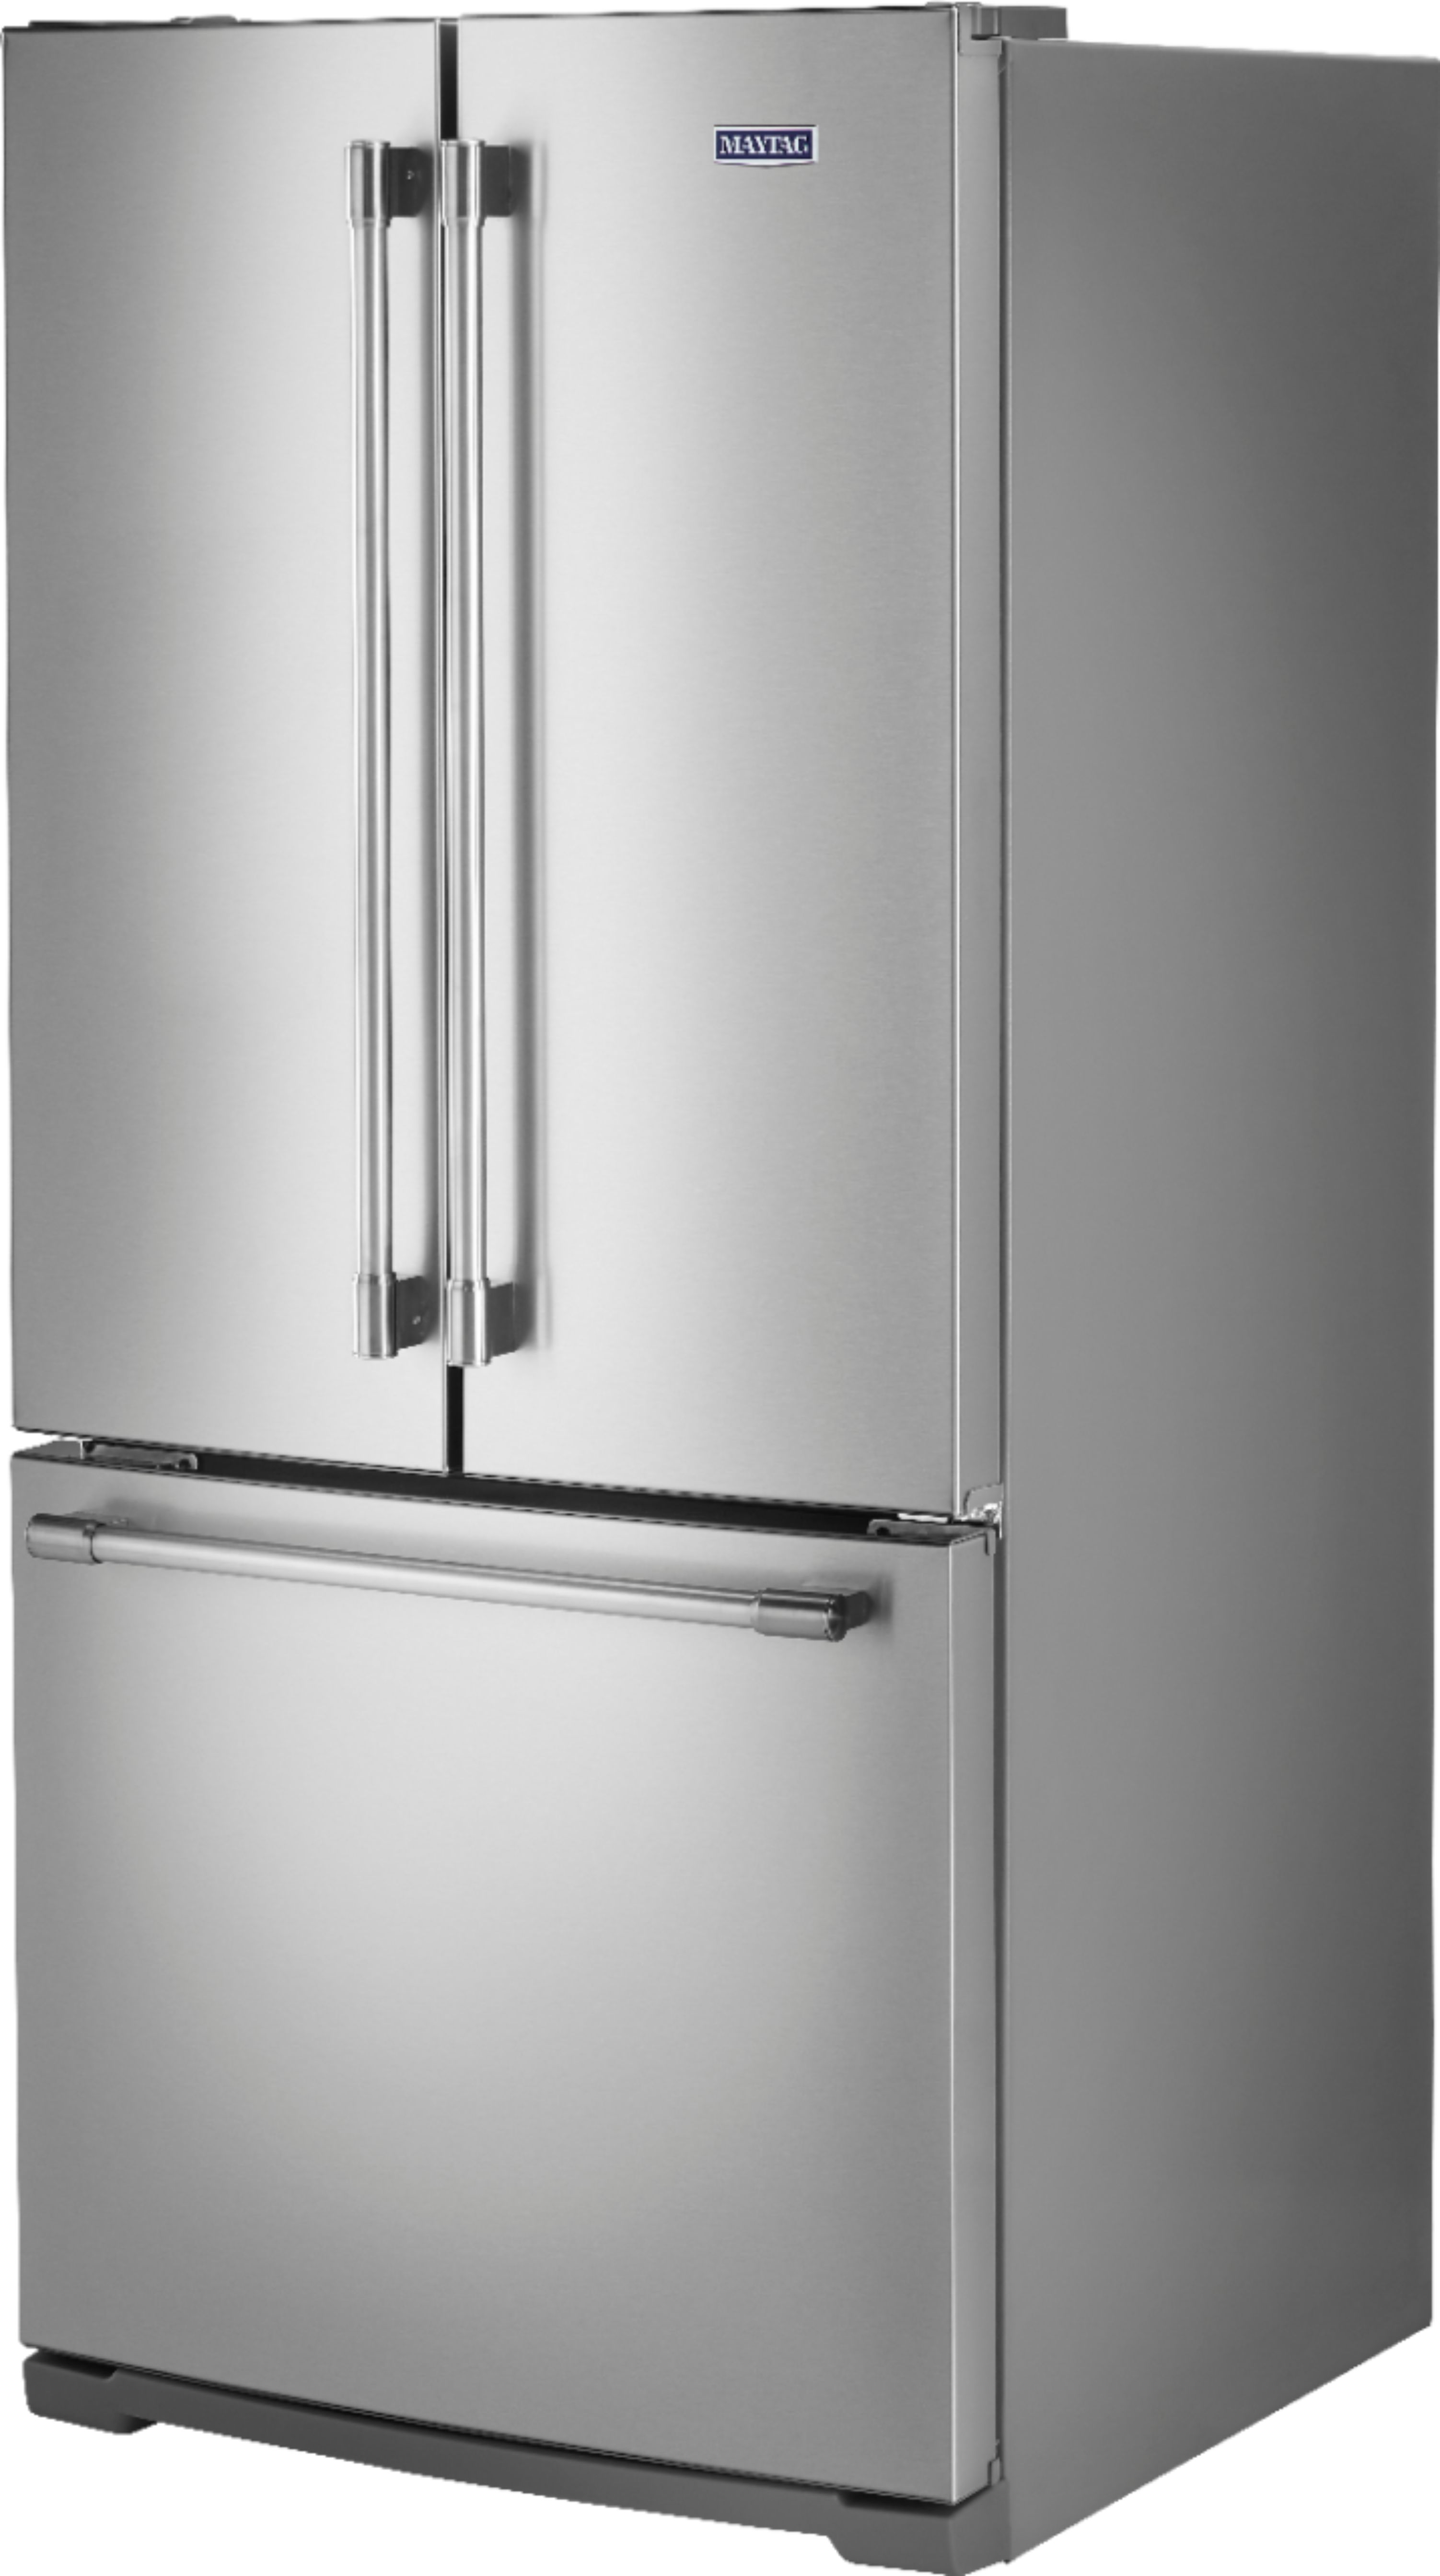 Left View: Maytag - 19.7 Cu. Ft. French Door Refrigerator - Stainless steel